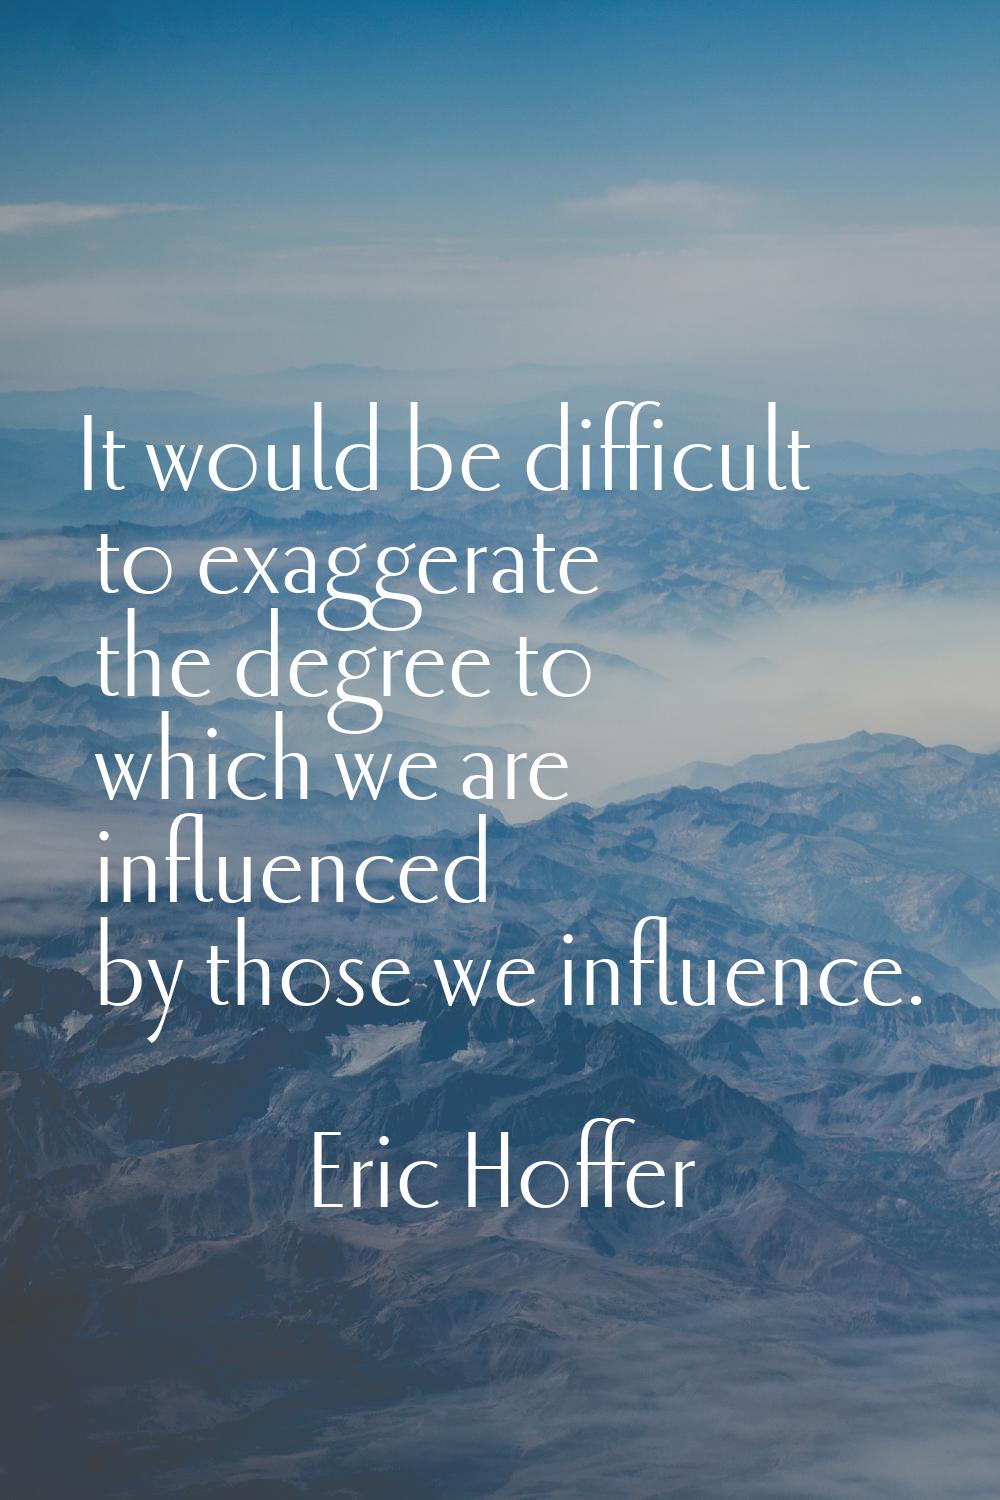 It would be difficult to exaggerate the degree to which we are influenced by those we influence.